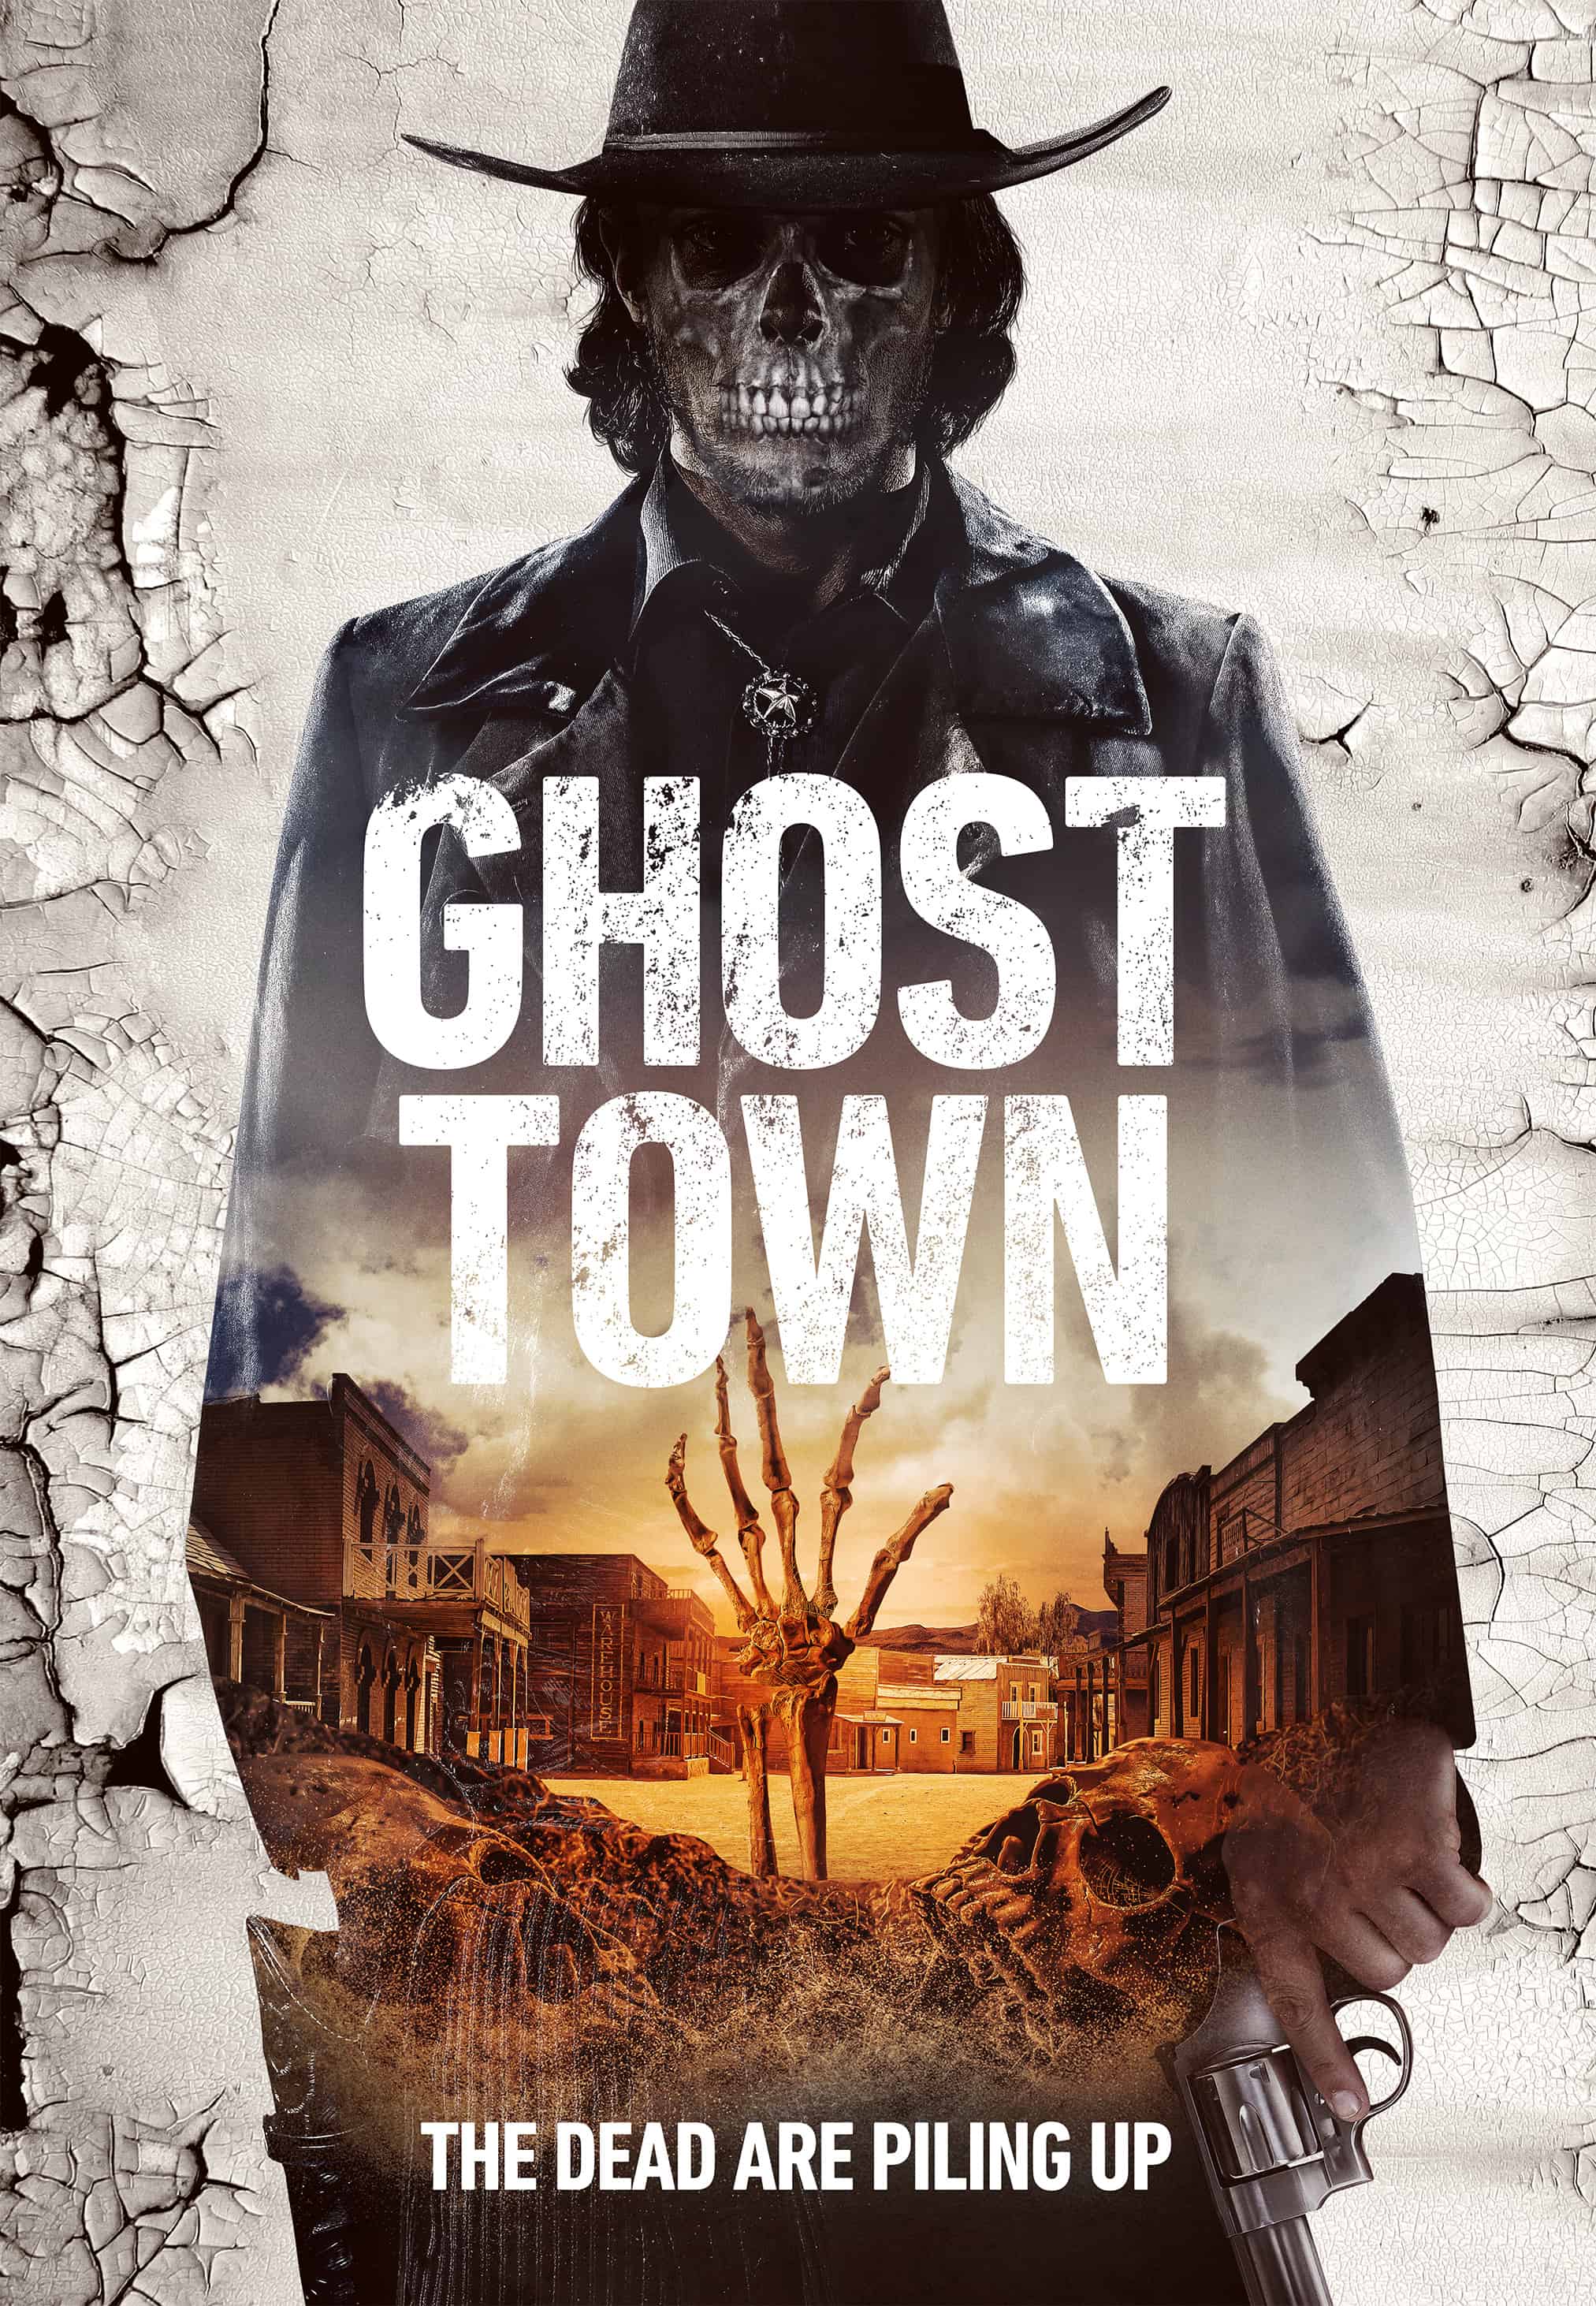 Ghost Town offers up a poster and trailer arrives March 7th 25